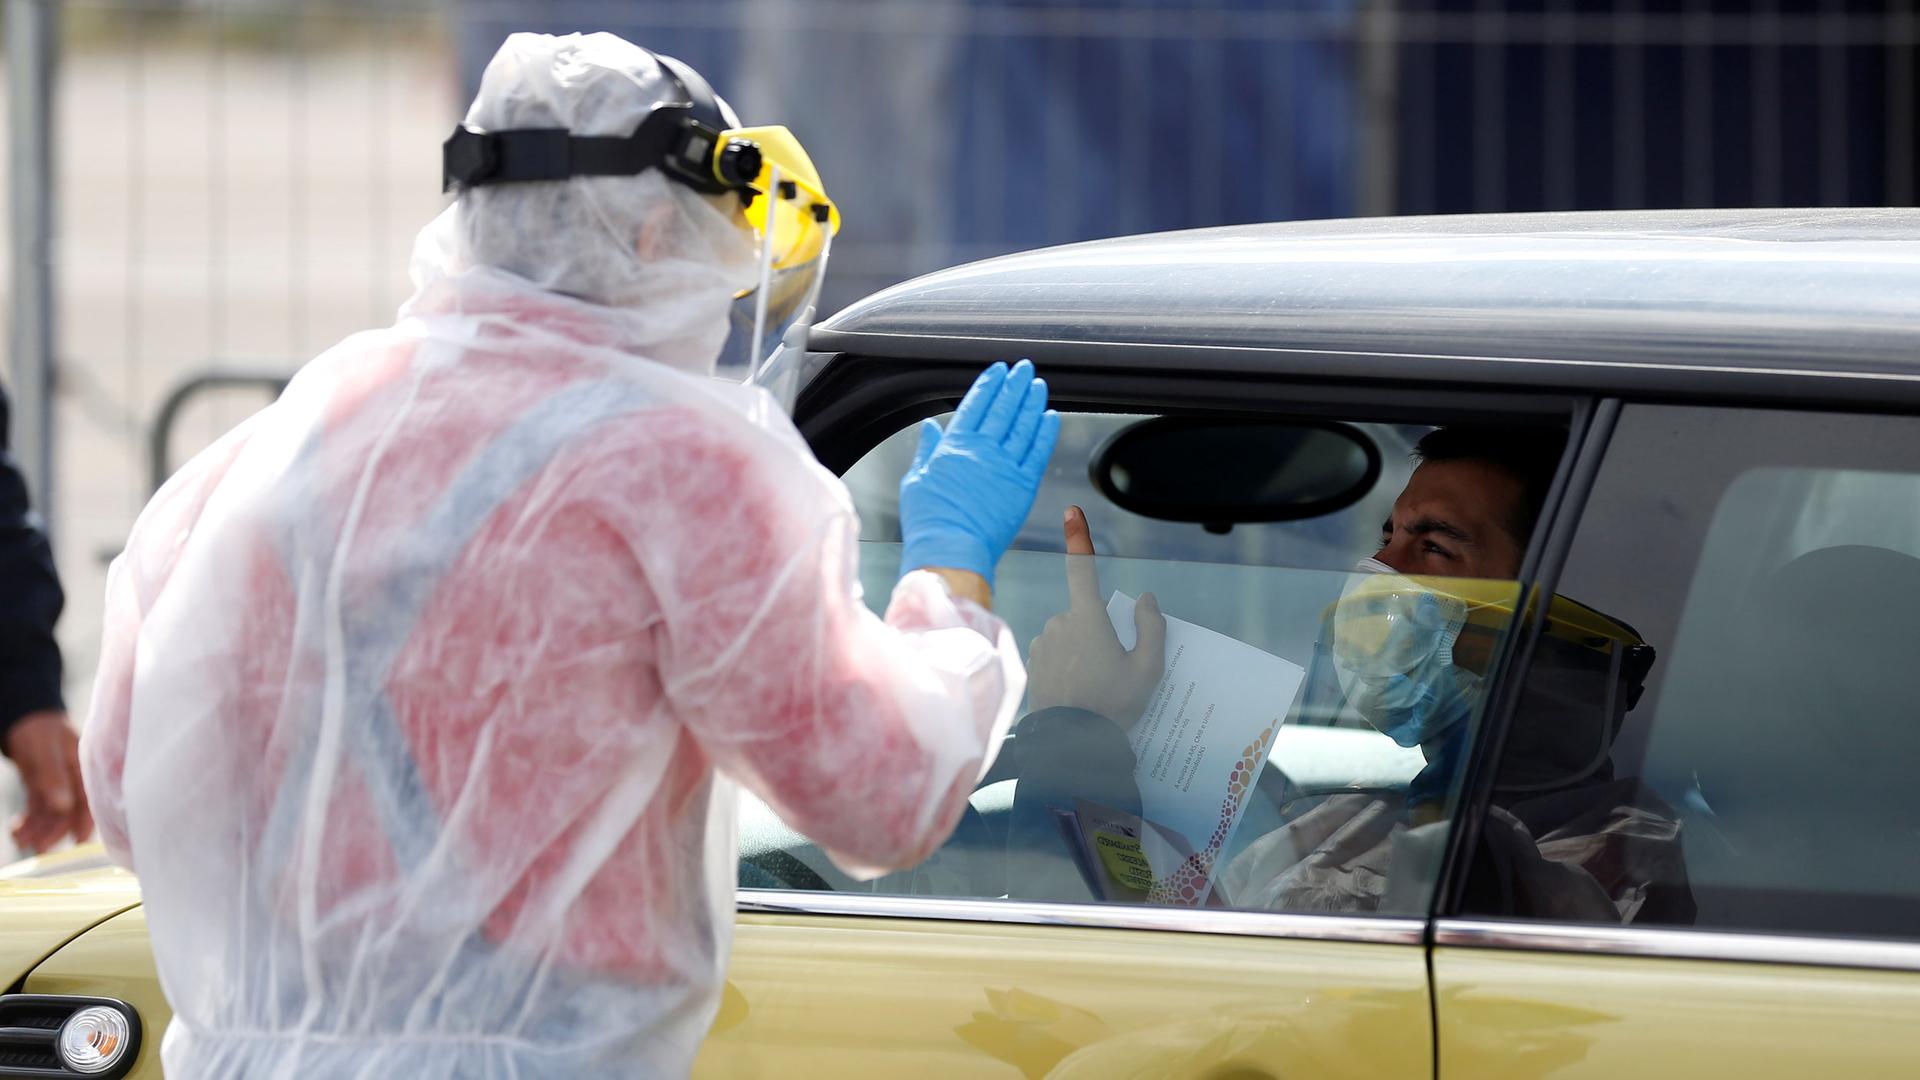 A health worker wearing a full protective gown and face guard is shown standing with his hand in the air at a drive-through coronavirus disease testing center.